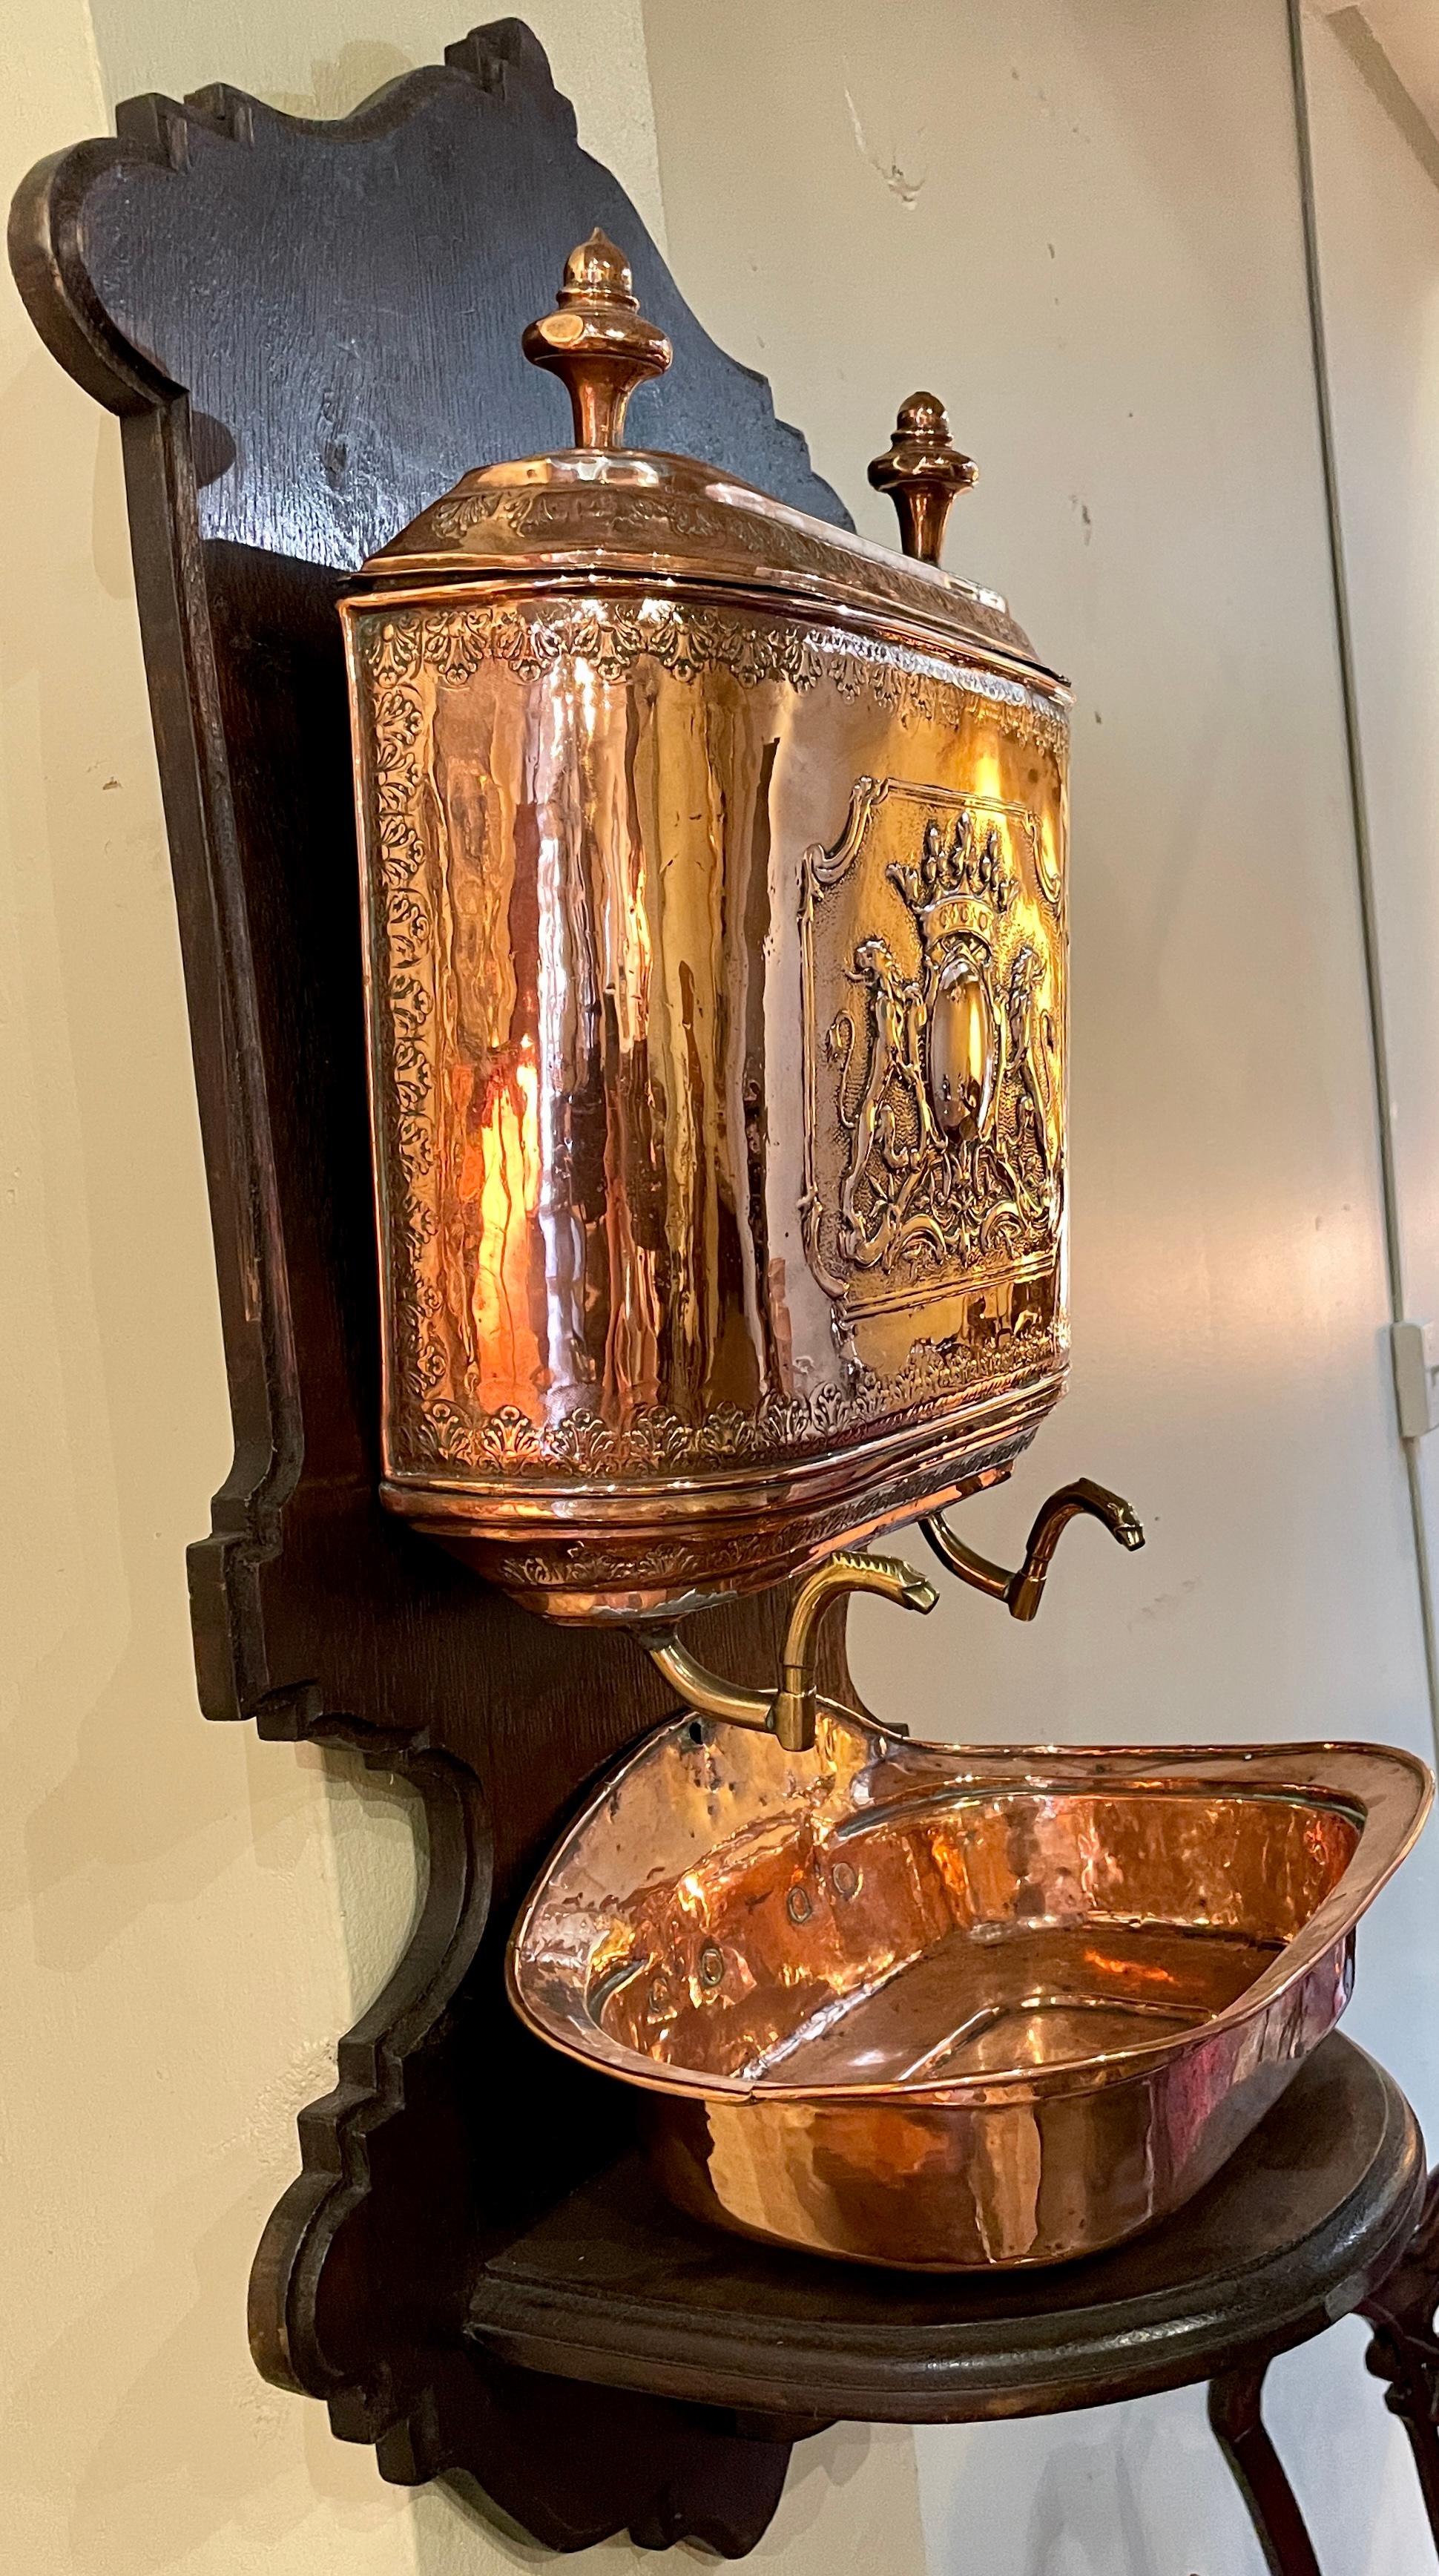 Exceptional Antique French Wall-Mounted Copper Lavabo, Circa 1860-1880.